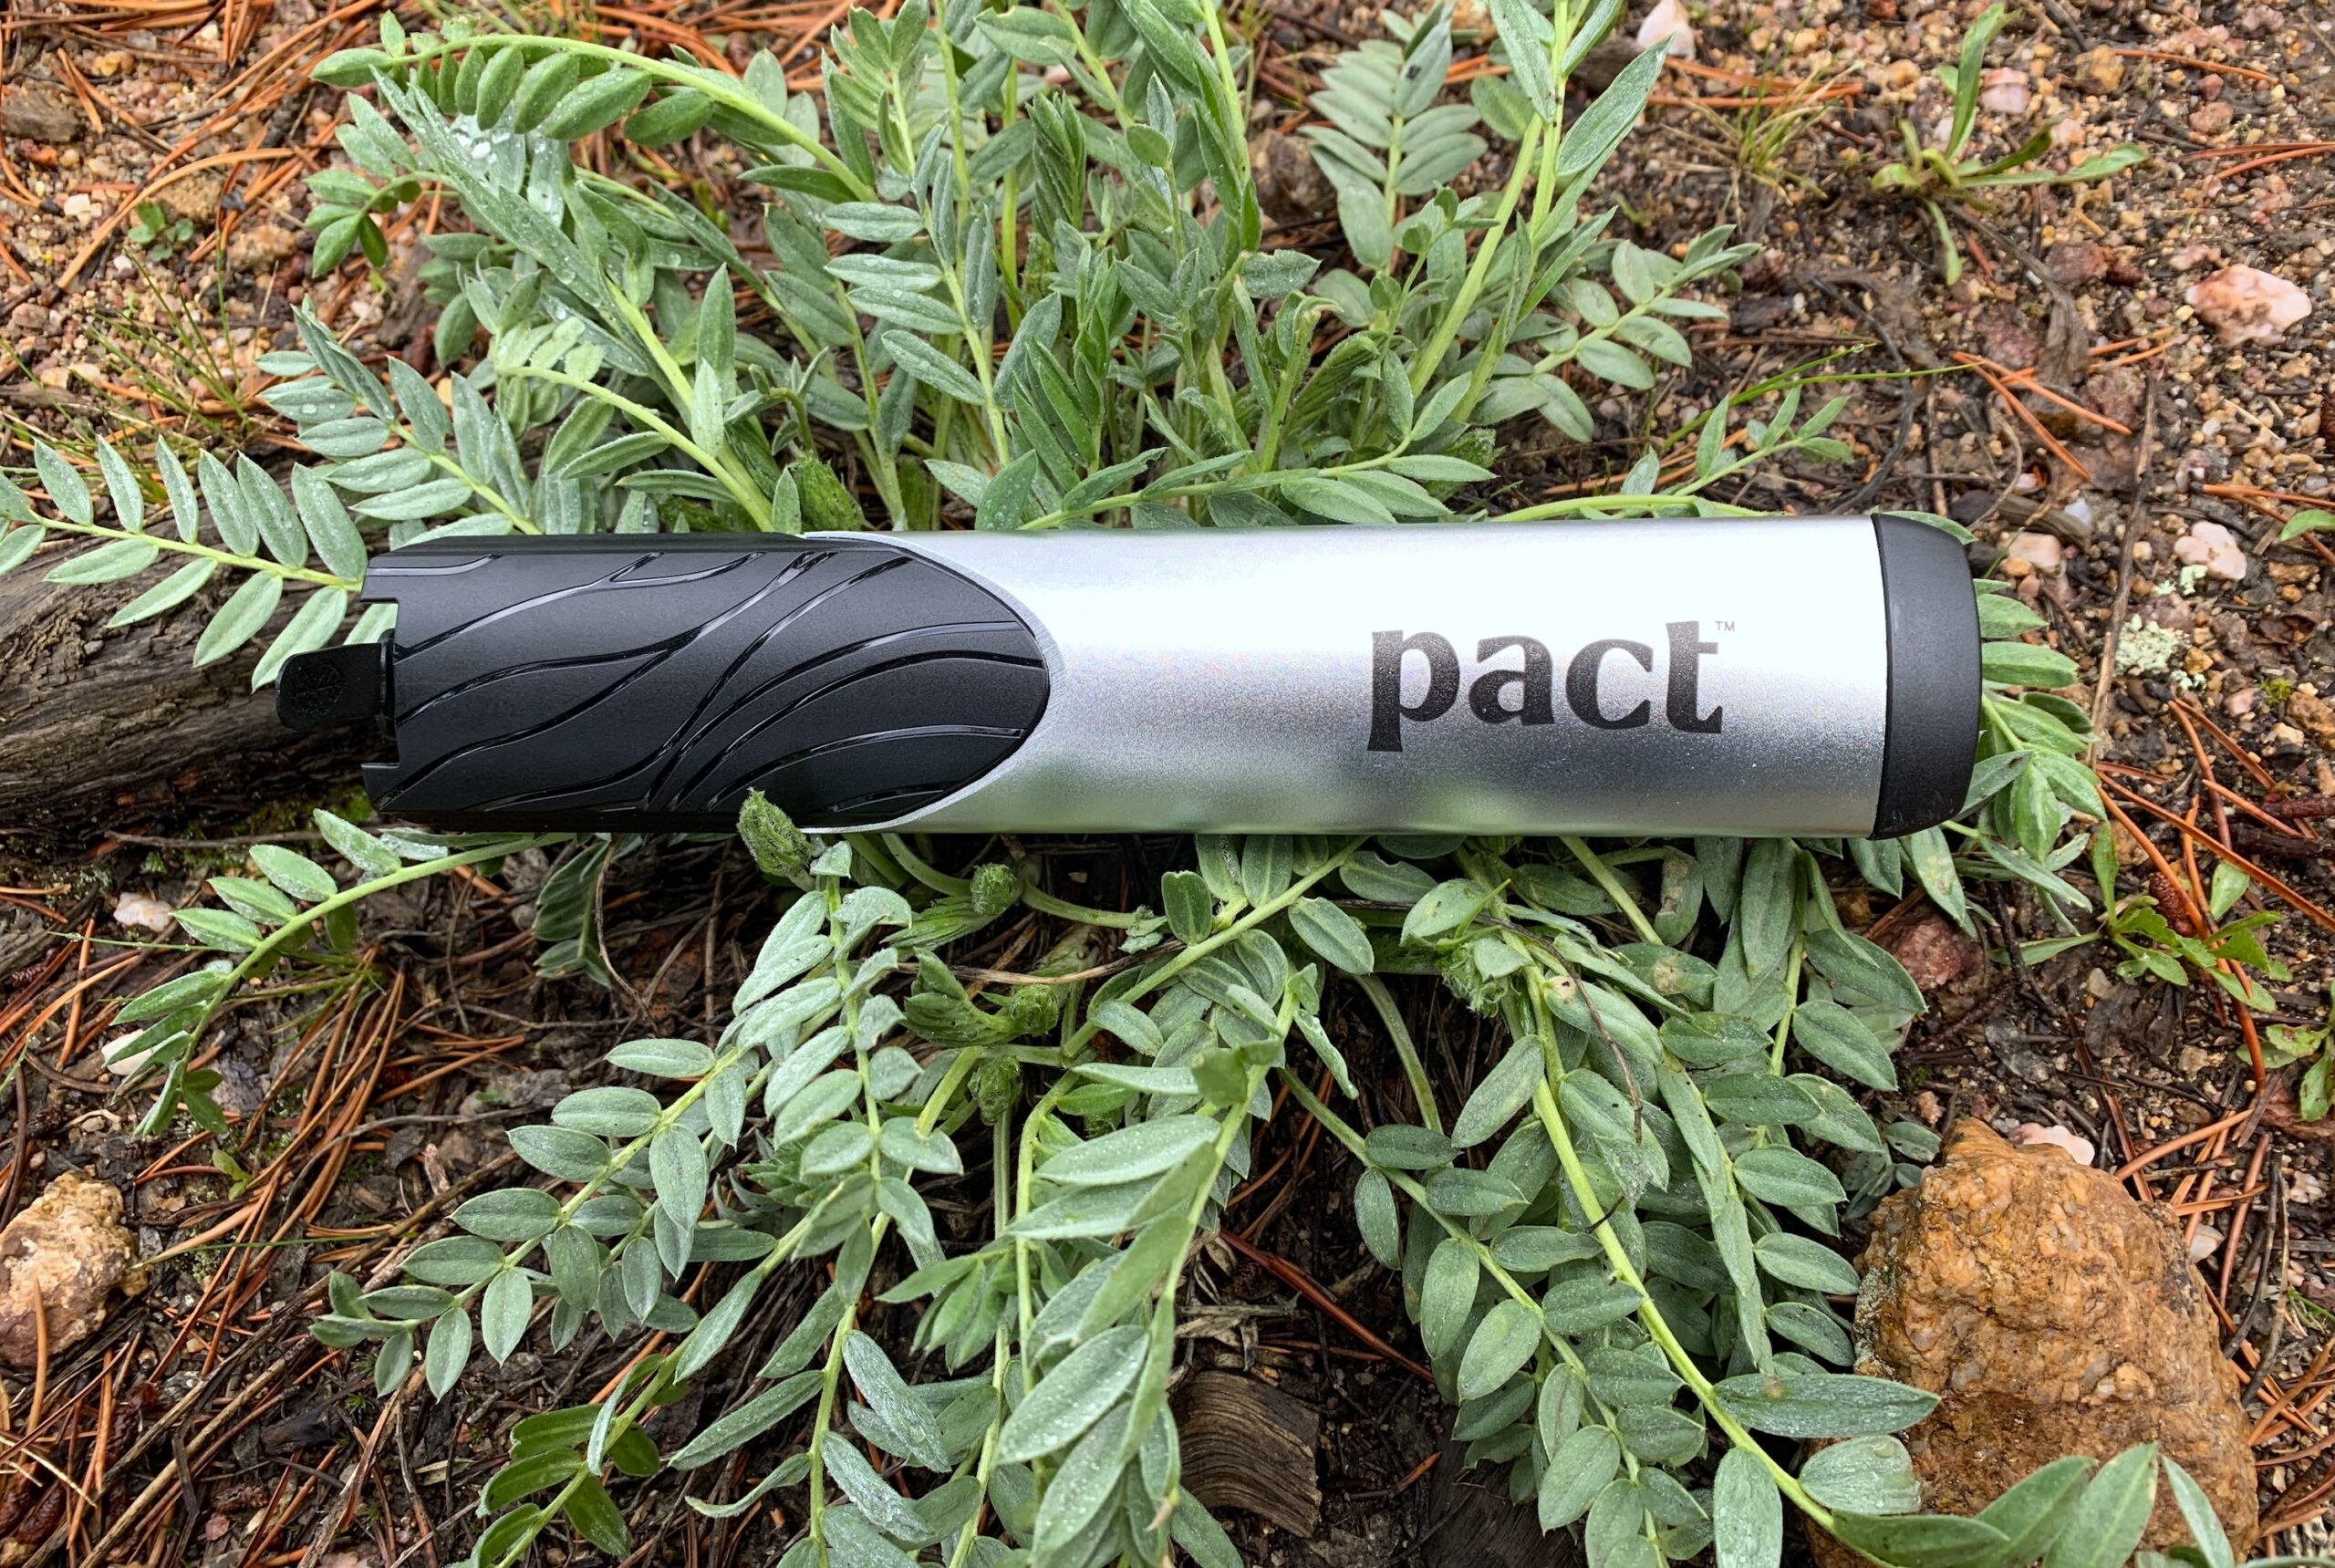 PACT Outdoors Pact Lite Review: Has the Ultimate Poop Kit Finally Arrived?